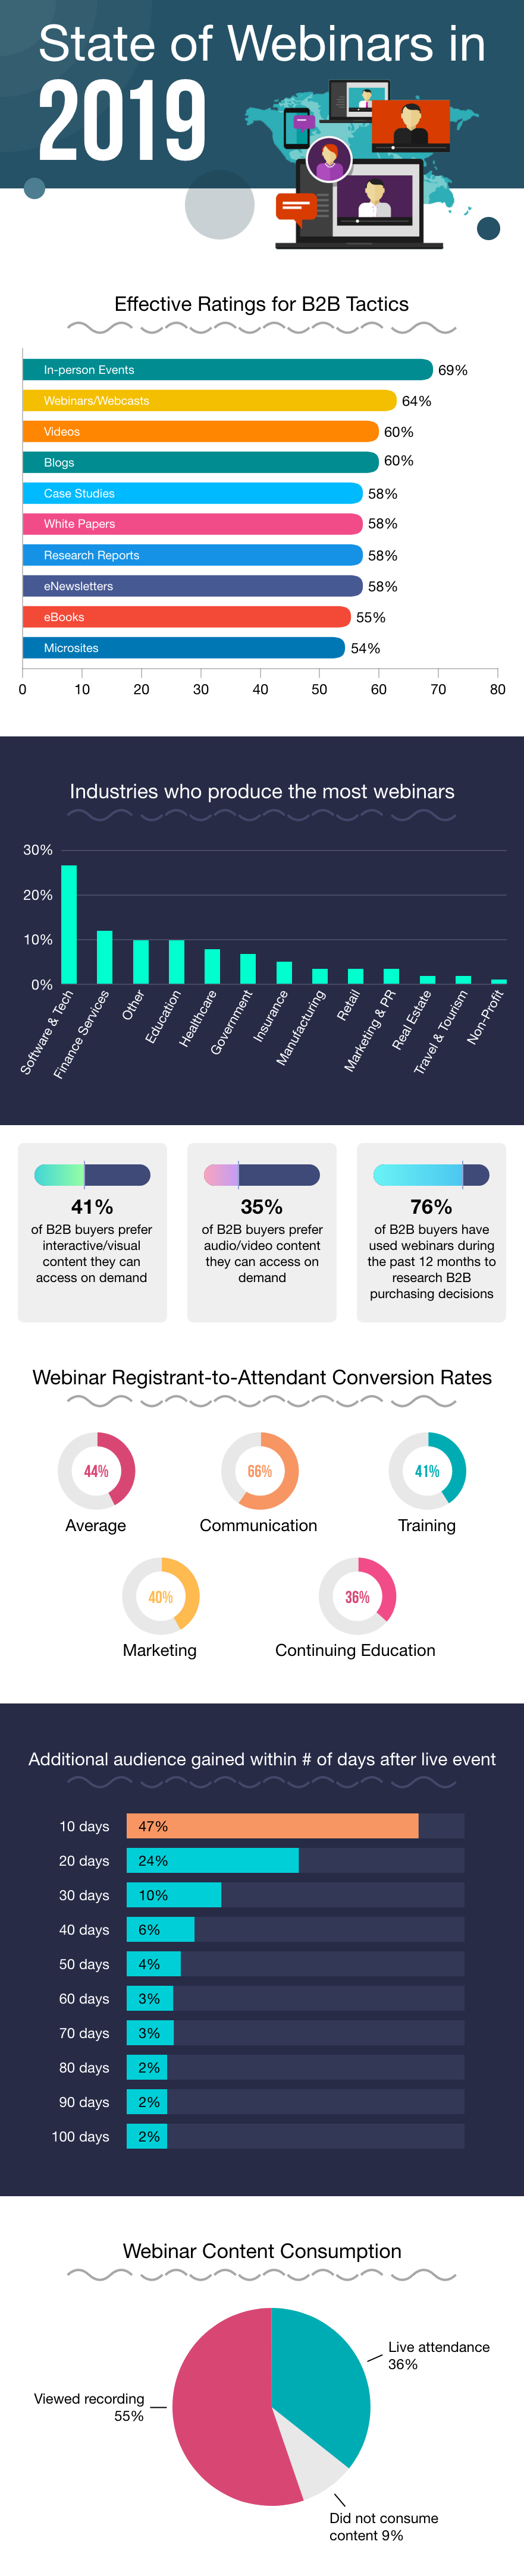 15 Ways to Create Webinars that Converts and Drive Engagement